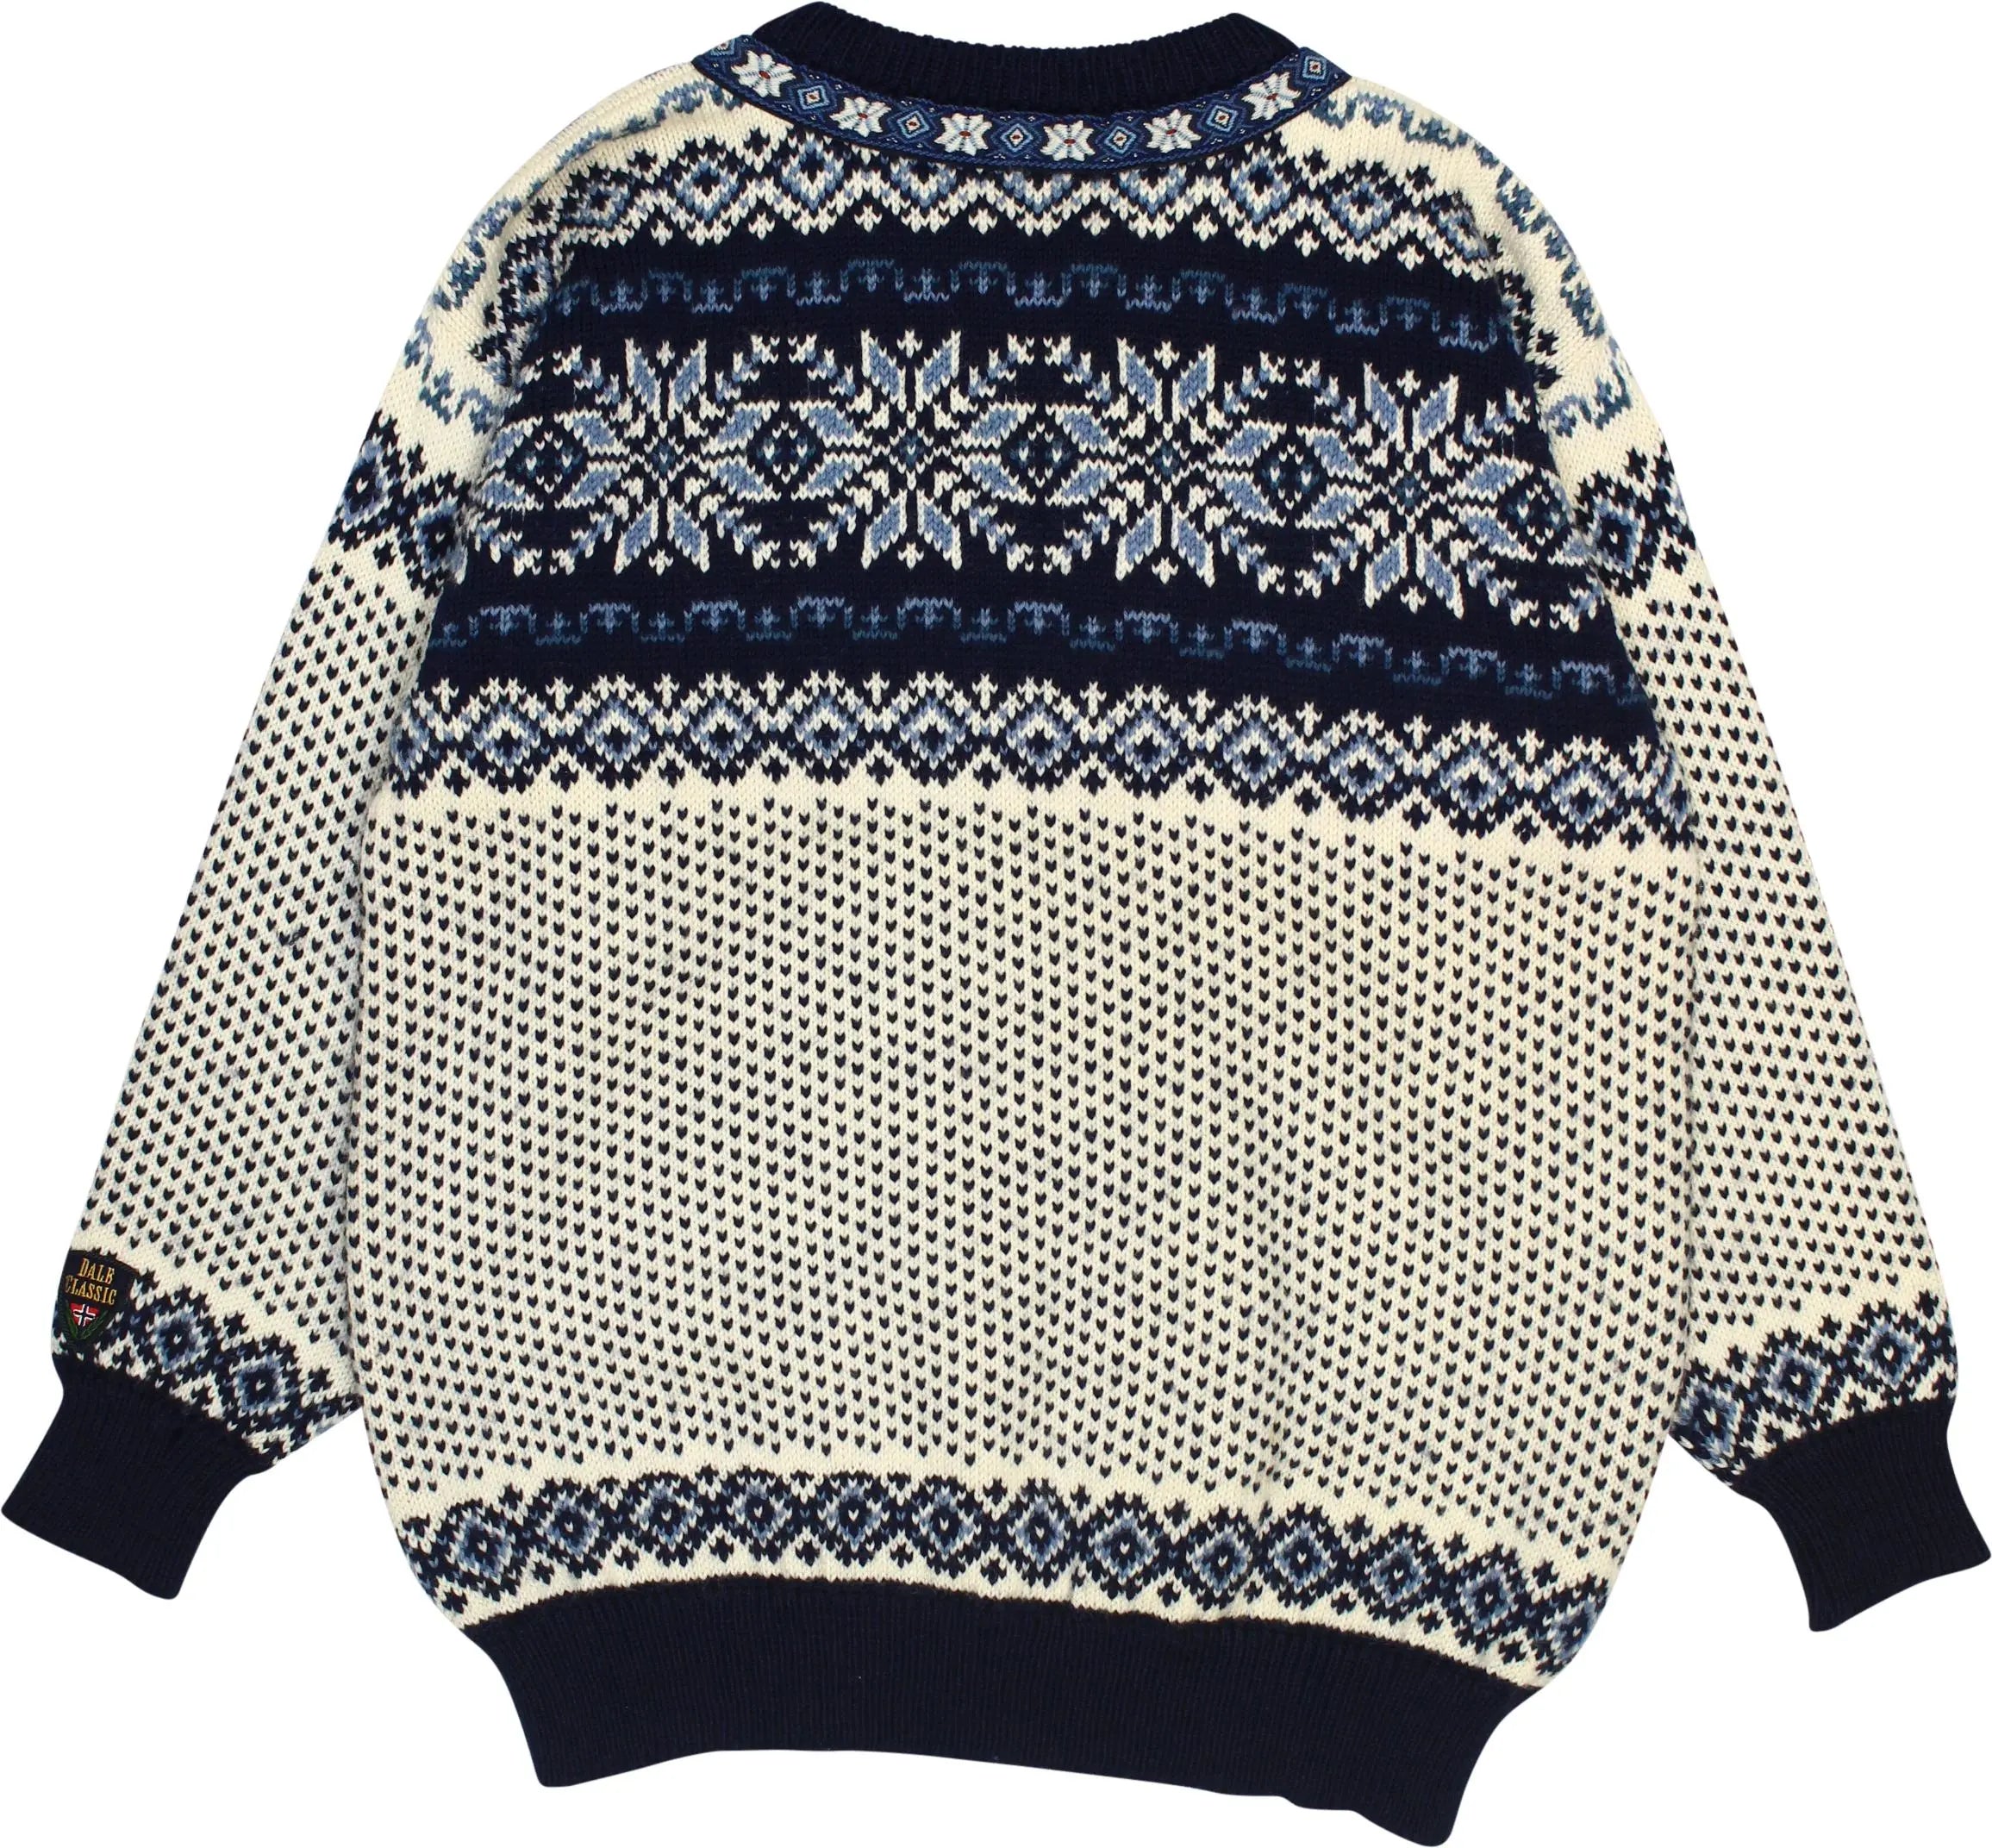 Dale of Norway - Nordic Setesdal Cardigan- ThriftTale.com - Vintage and second handclothing